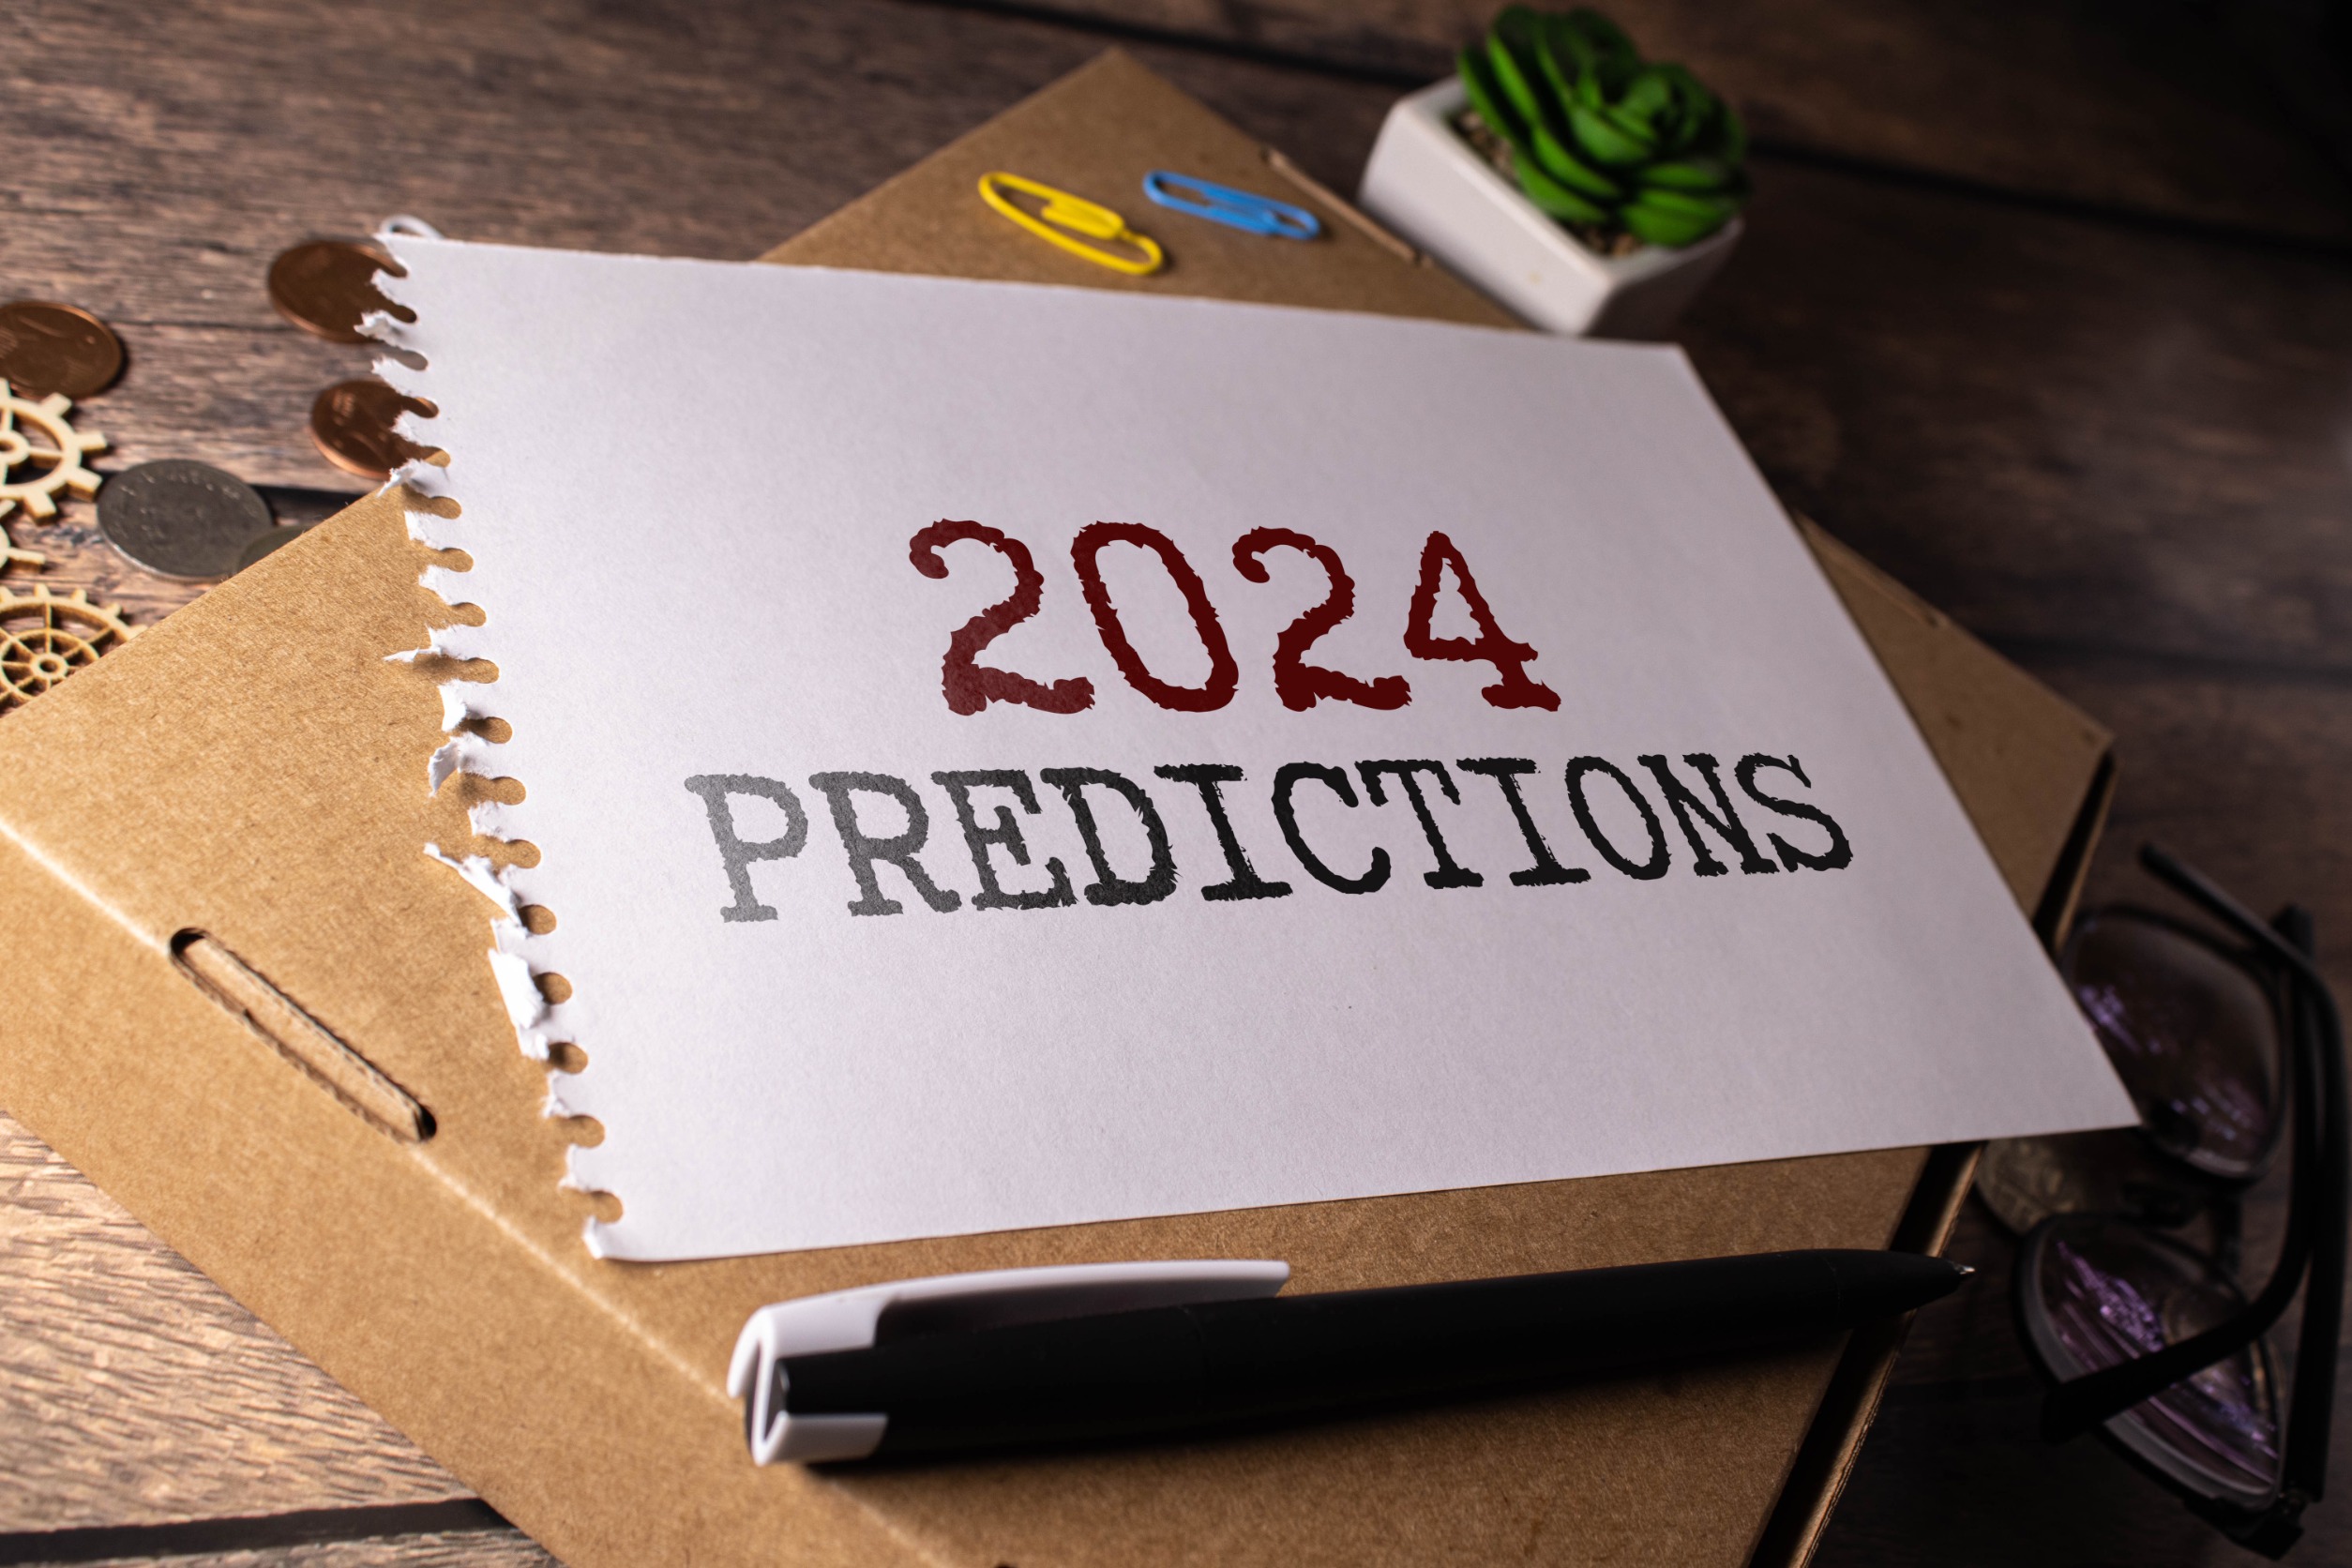 2024 predictions written on paper